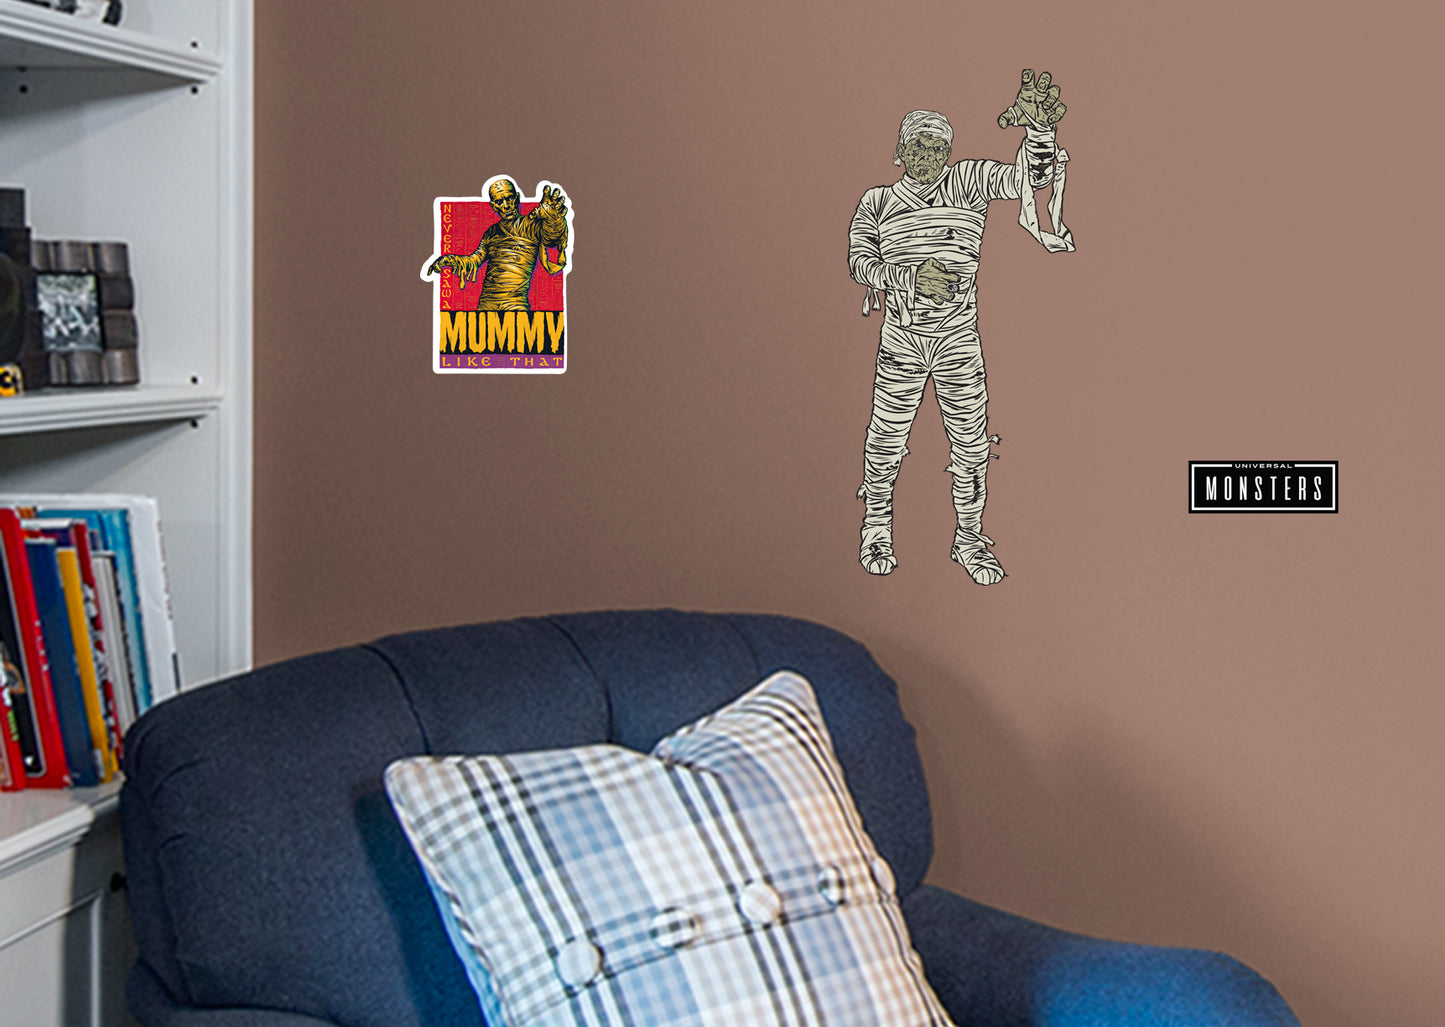 Universal Monsters: Mummy Animated RealBig        - Officially Licensed NBC Universal Removable Wall   Adhesive Decal